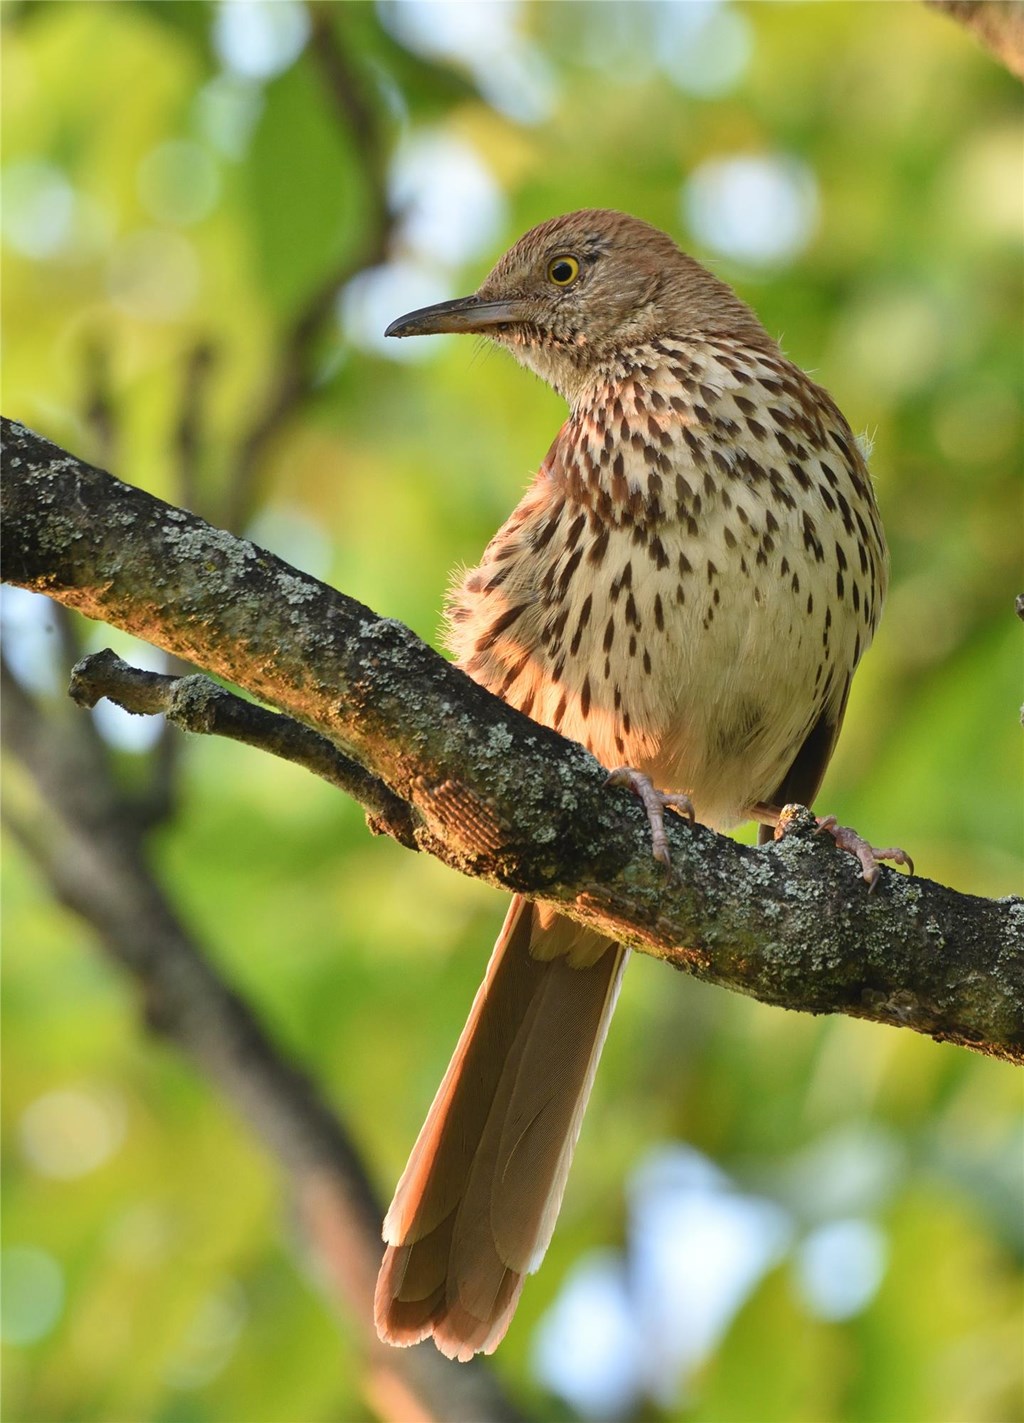 Brown Thrasher Perched On a Branch